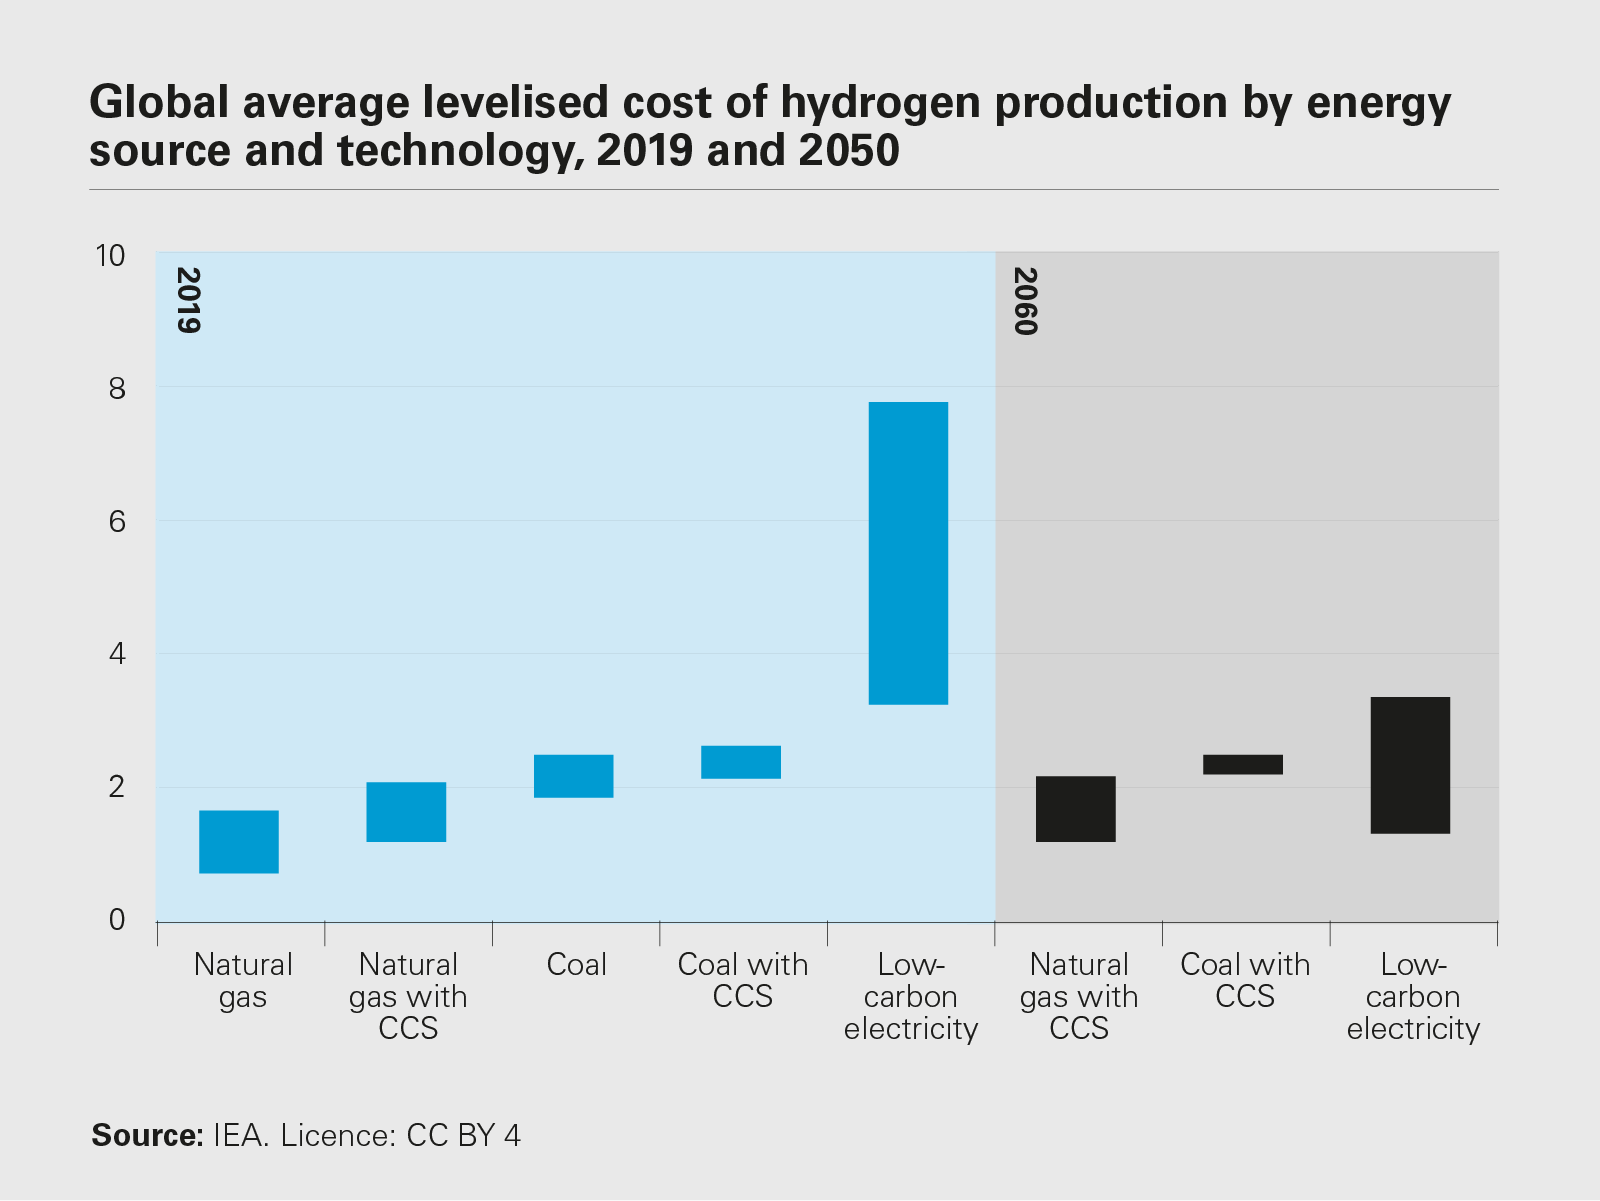 Global average levelised cost of hydrogen production by energy source and technology, 2019 and 2050